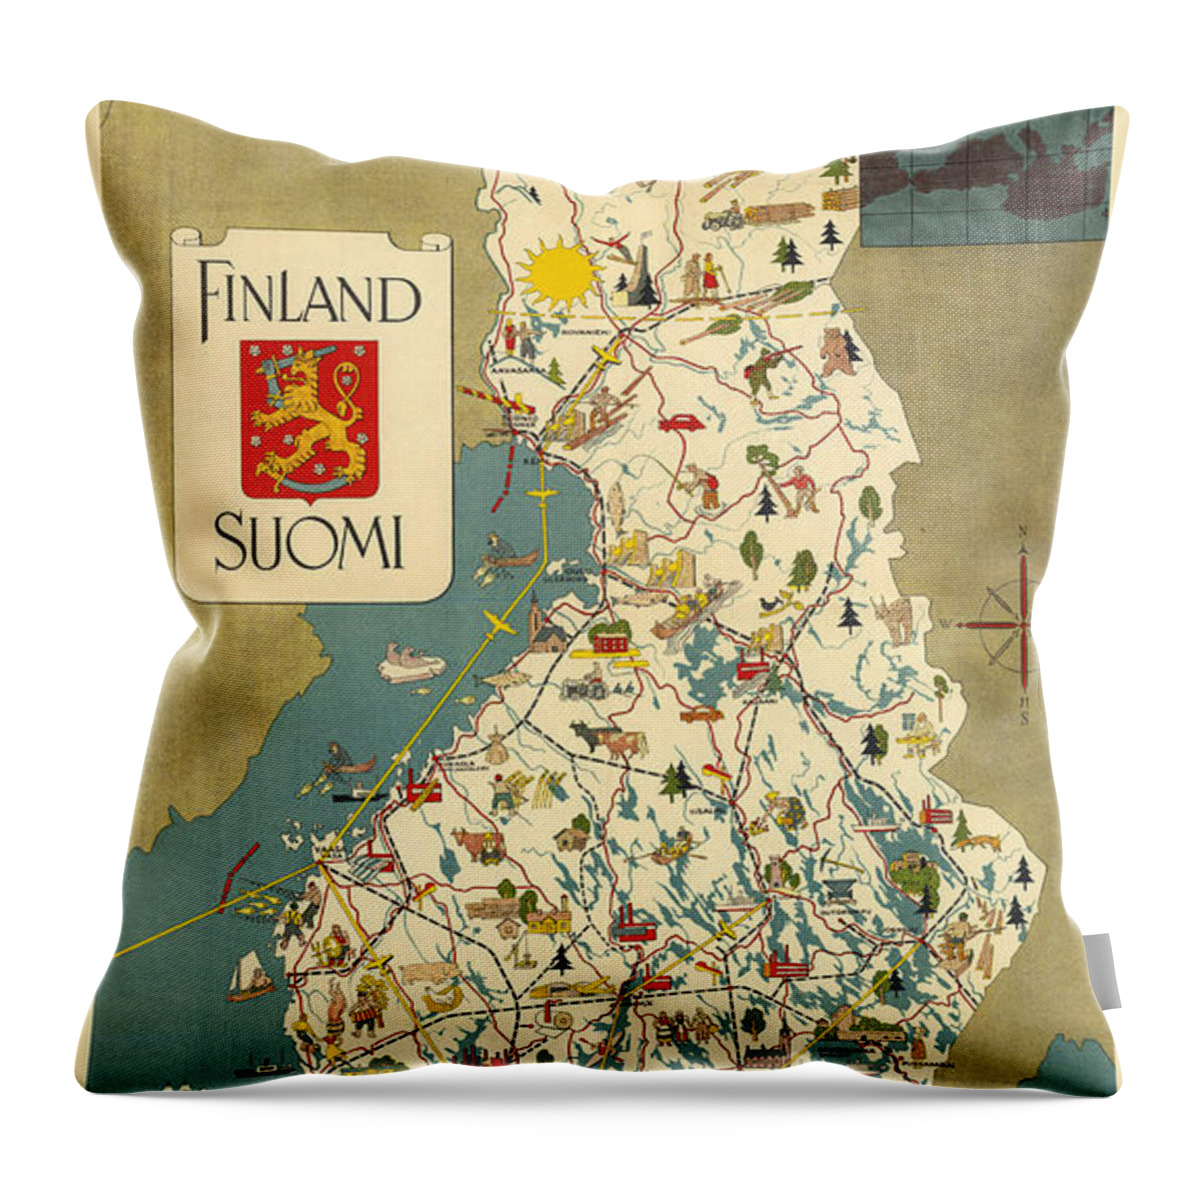 Finland Throw Pillow featuring the mixed media Finland - Suomi - Vintage Illustrated Map of Finland - Historical Map - Cartography by Studio Grafiikka